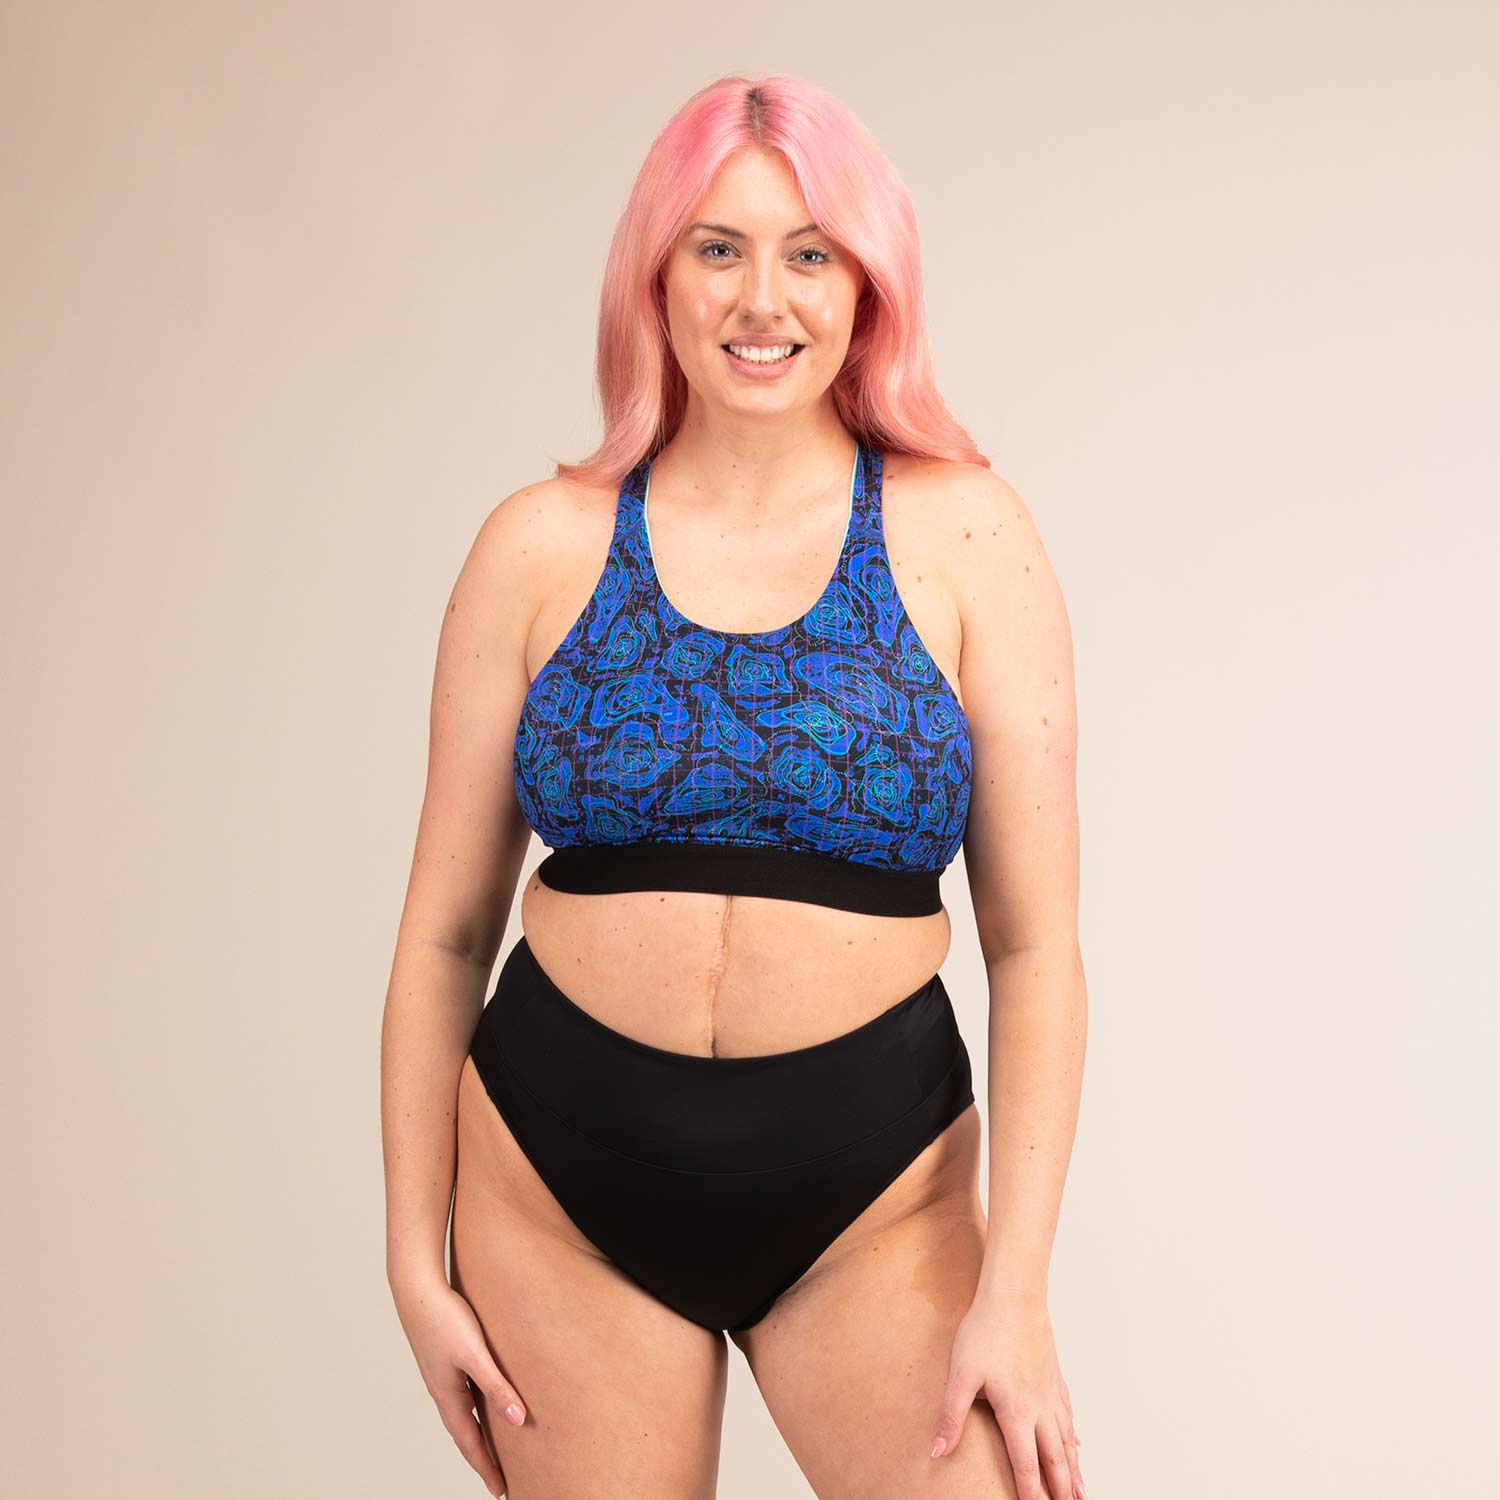 EQUINOX GEO JAGUAR | Reversible Recycled Sports Bra | 3RD ROCK Clothing -  Sophie is a 34G with a 32" underbust, 40.5" overbust and wears a size 16 F